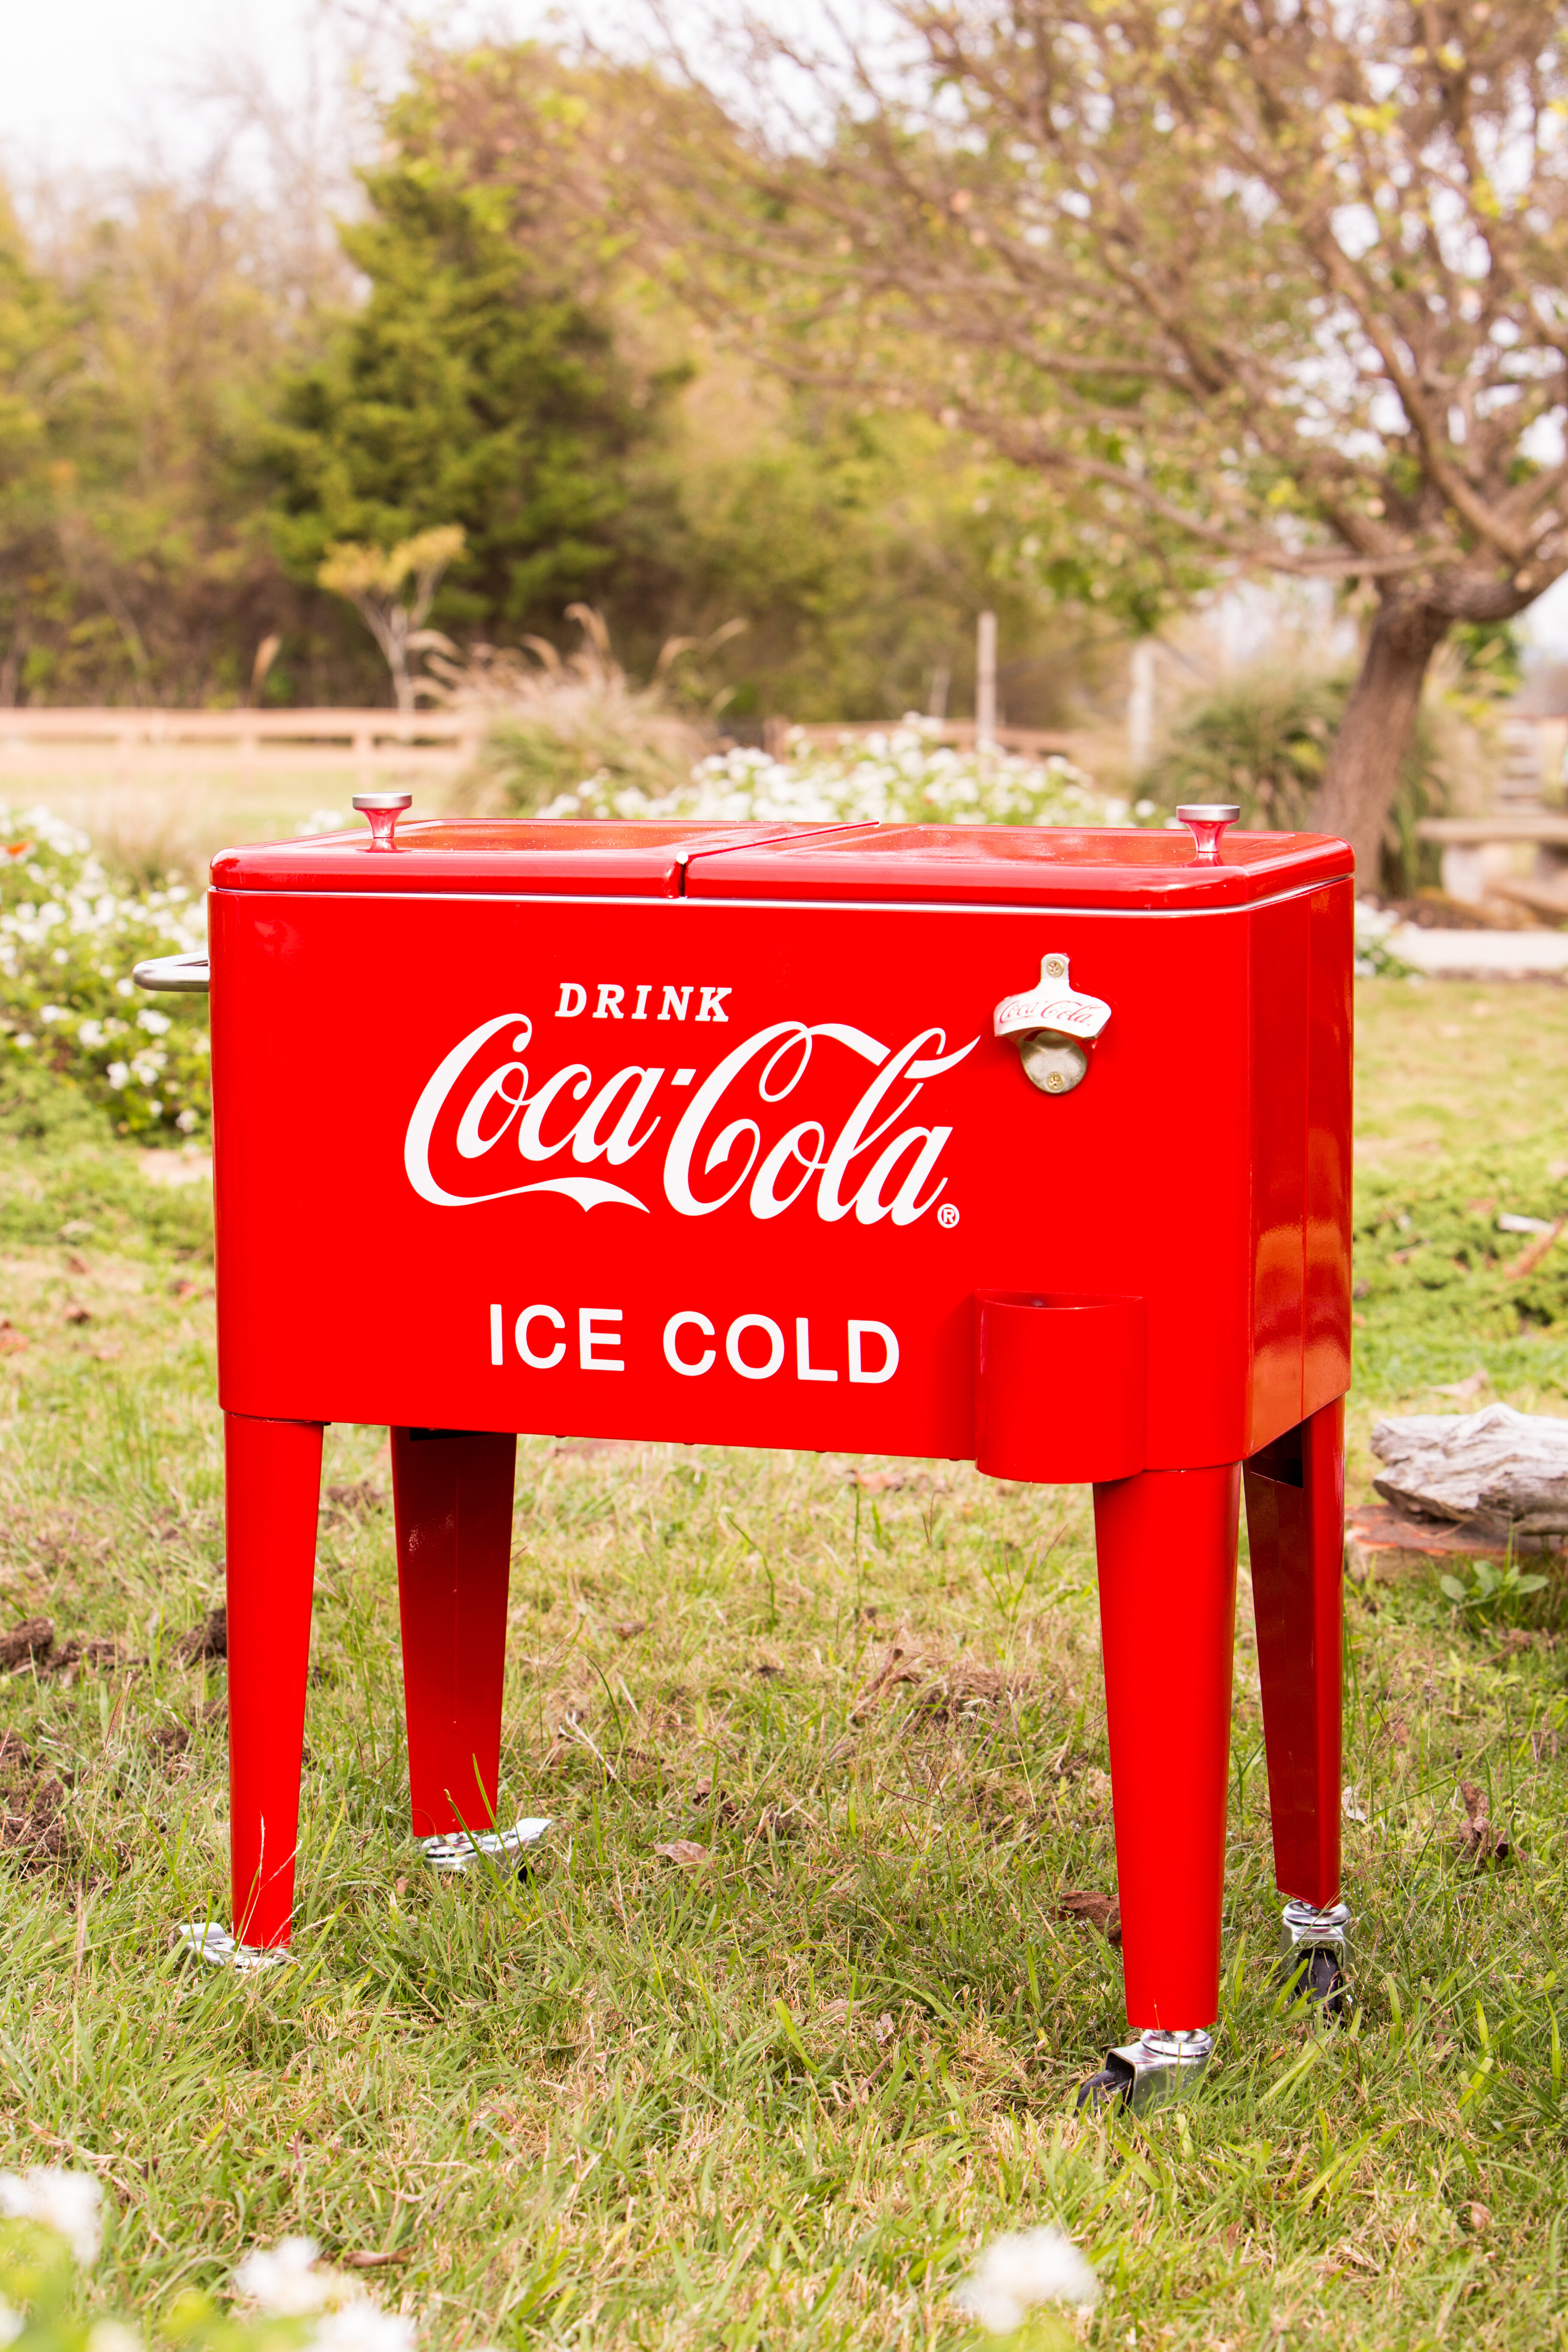 60 Qt. Coca-Cola Ice Cold Heavy Duty Rolling Cooler